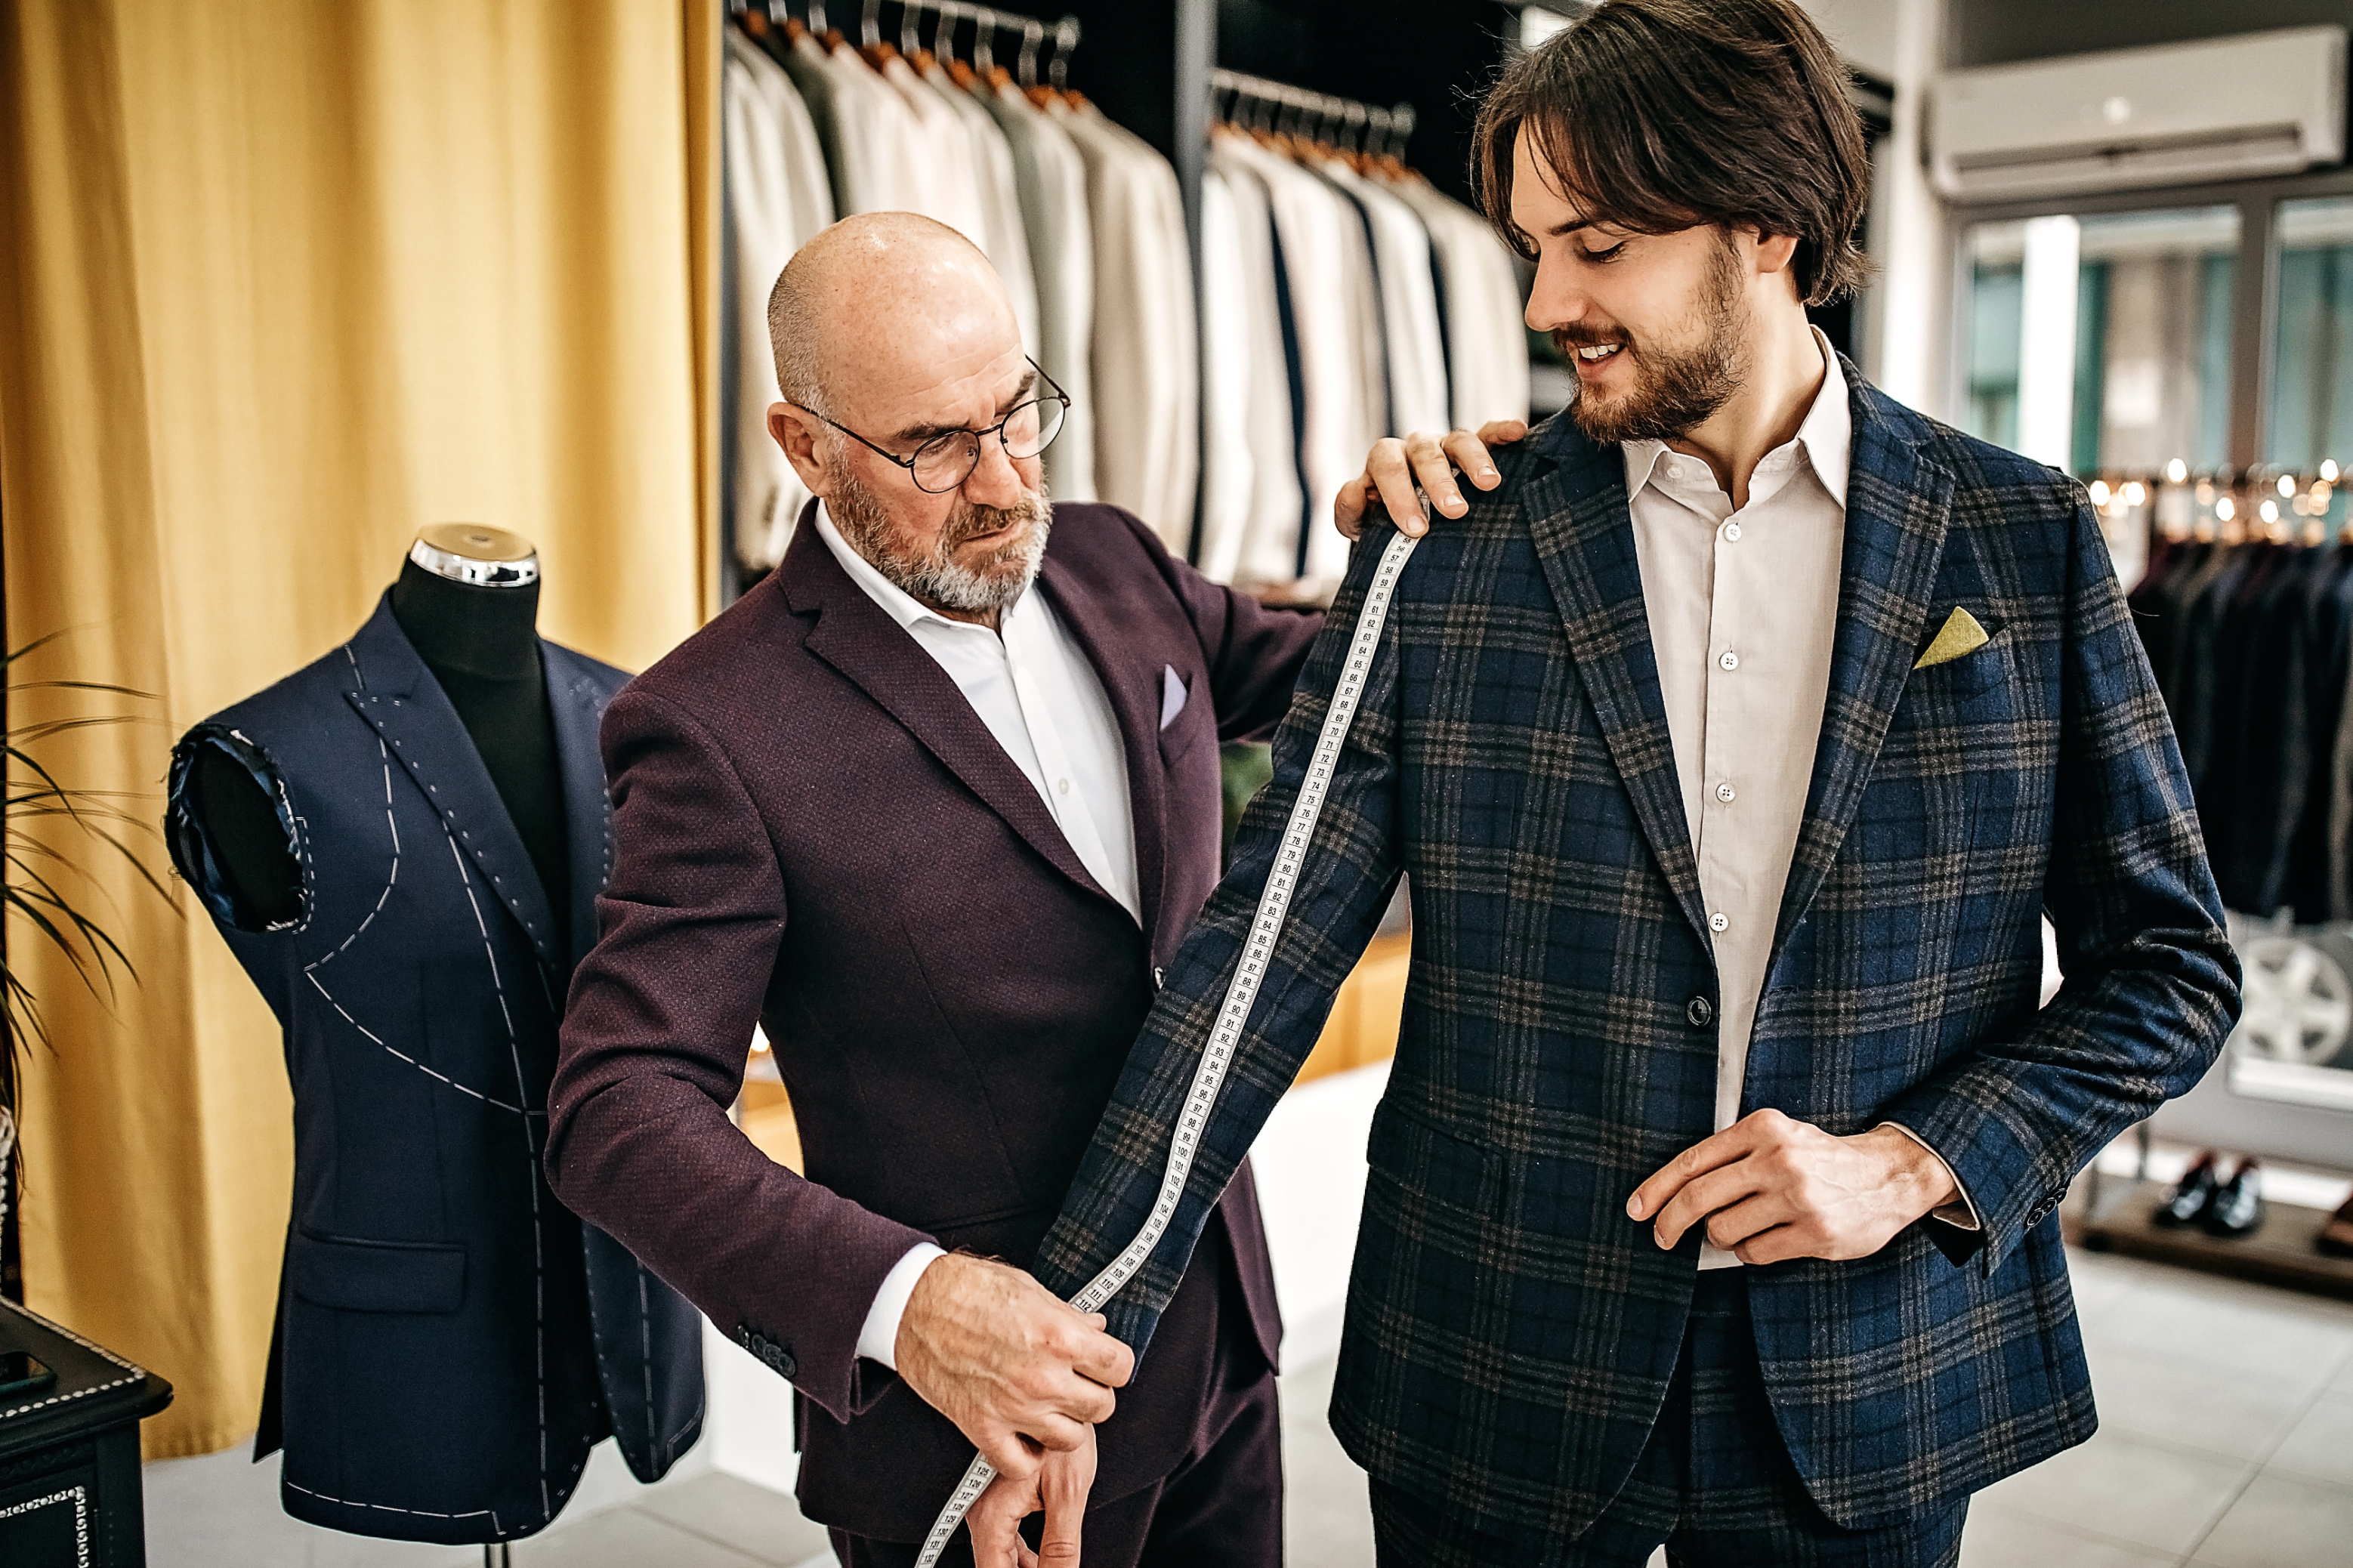 A man getting fitted for a suit